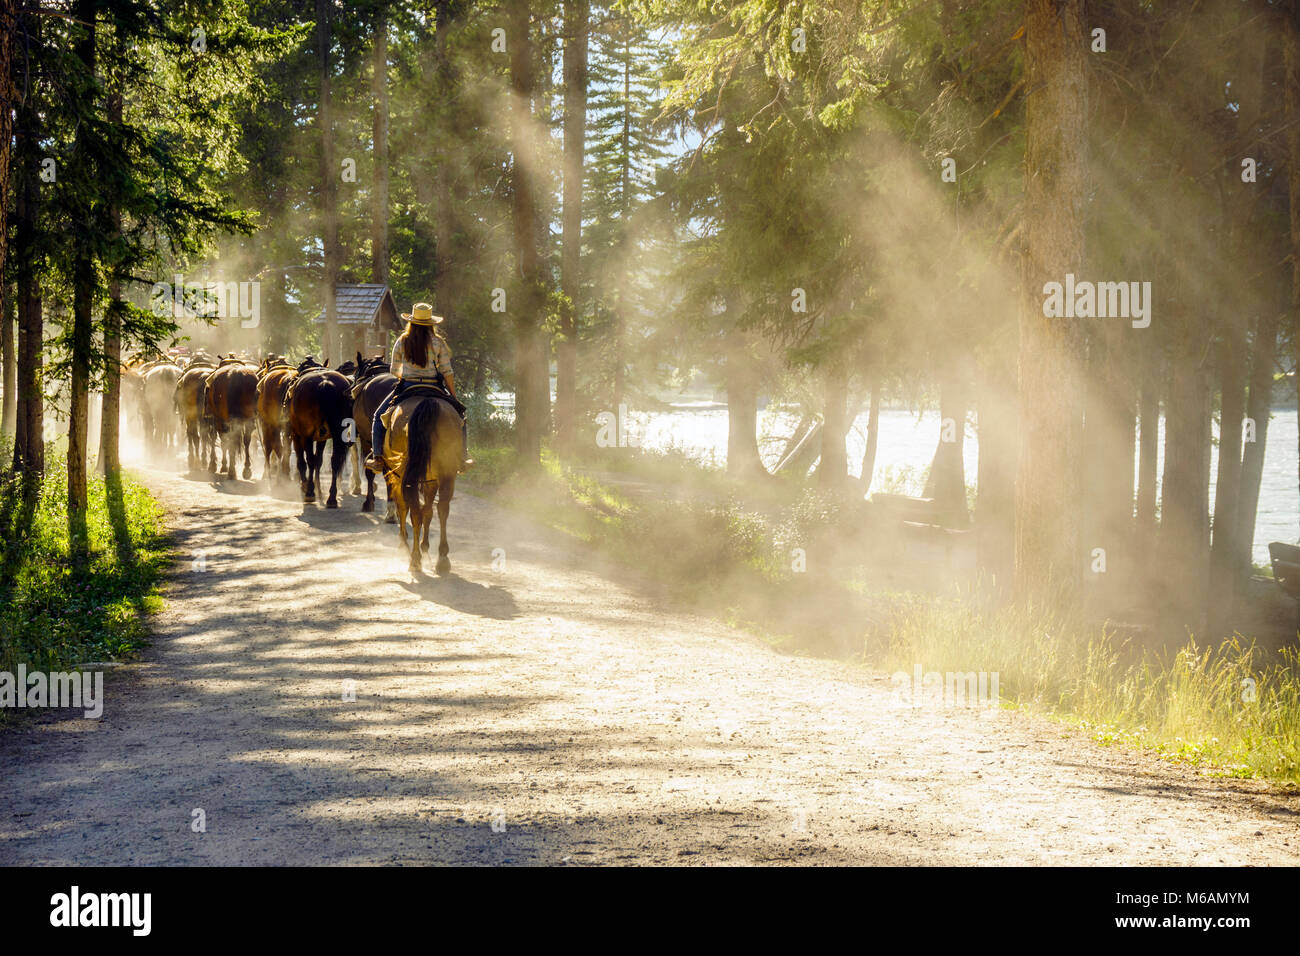 Herd of horses followed by woman on dusty forest path, Banff National Park, Alberta, Canada Stock Photo